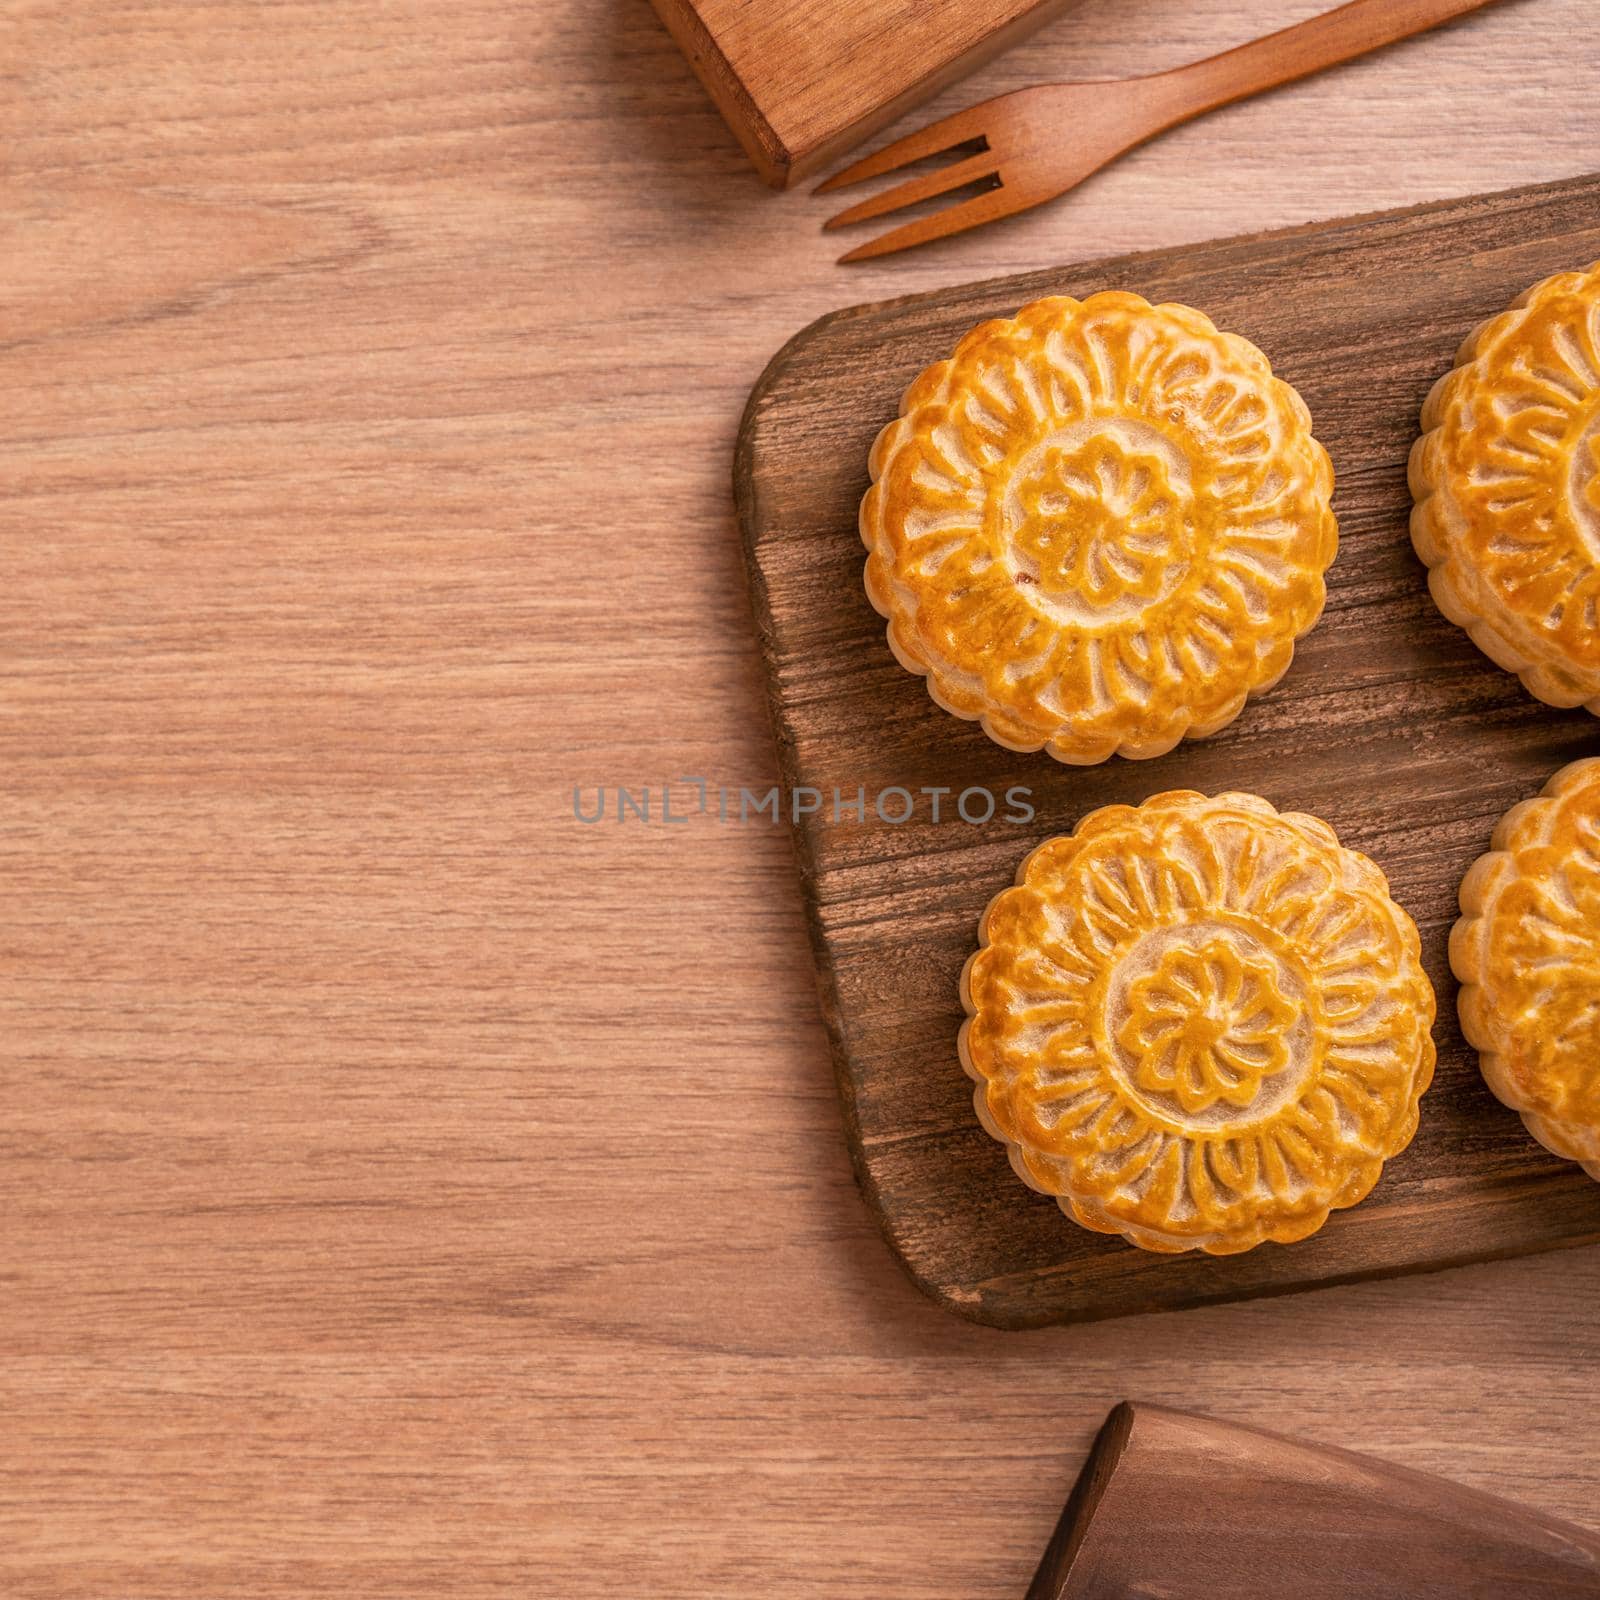 Round shaped moon cake Mooncake - Chinese style pastry during Mid-Autumn Festival / Moon Festival on wooden background and tray, top view, flat lay.